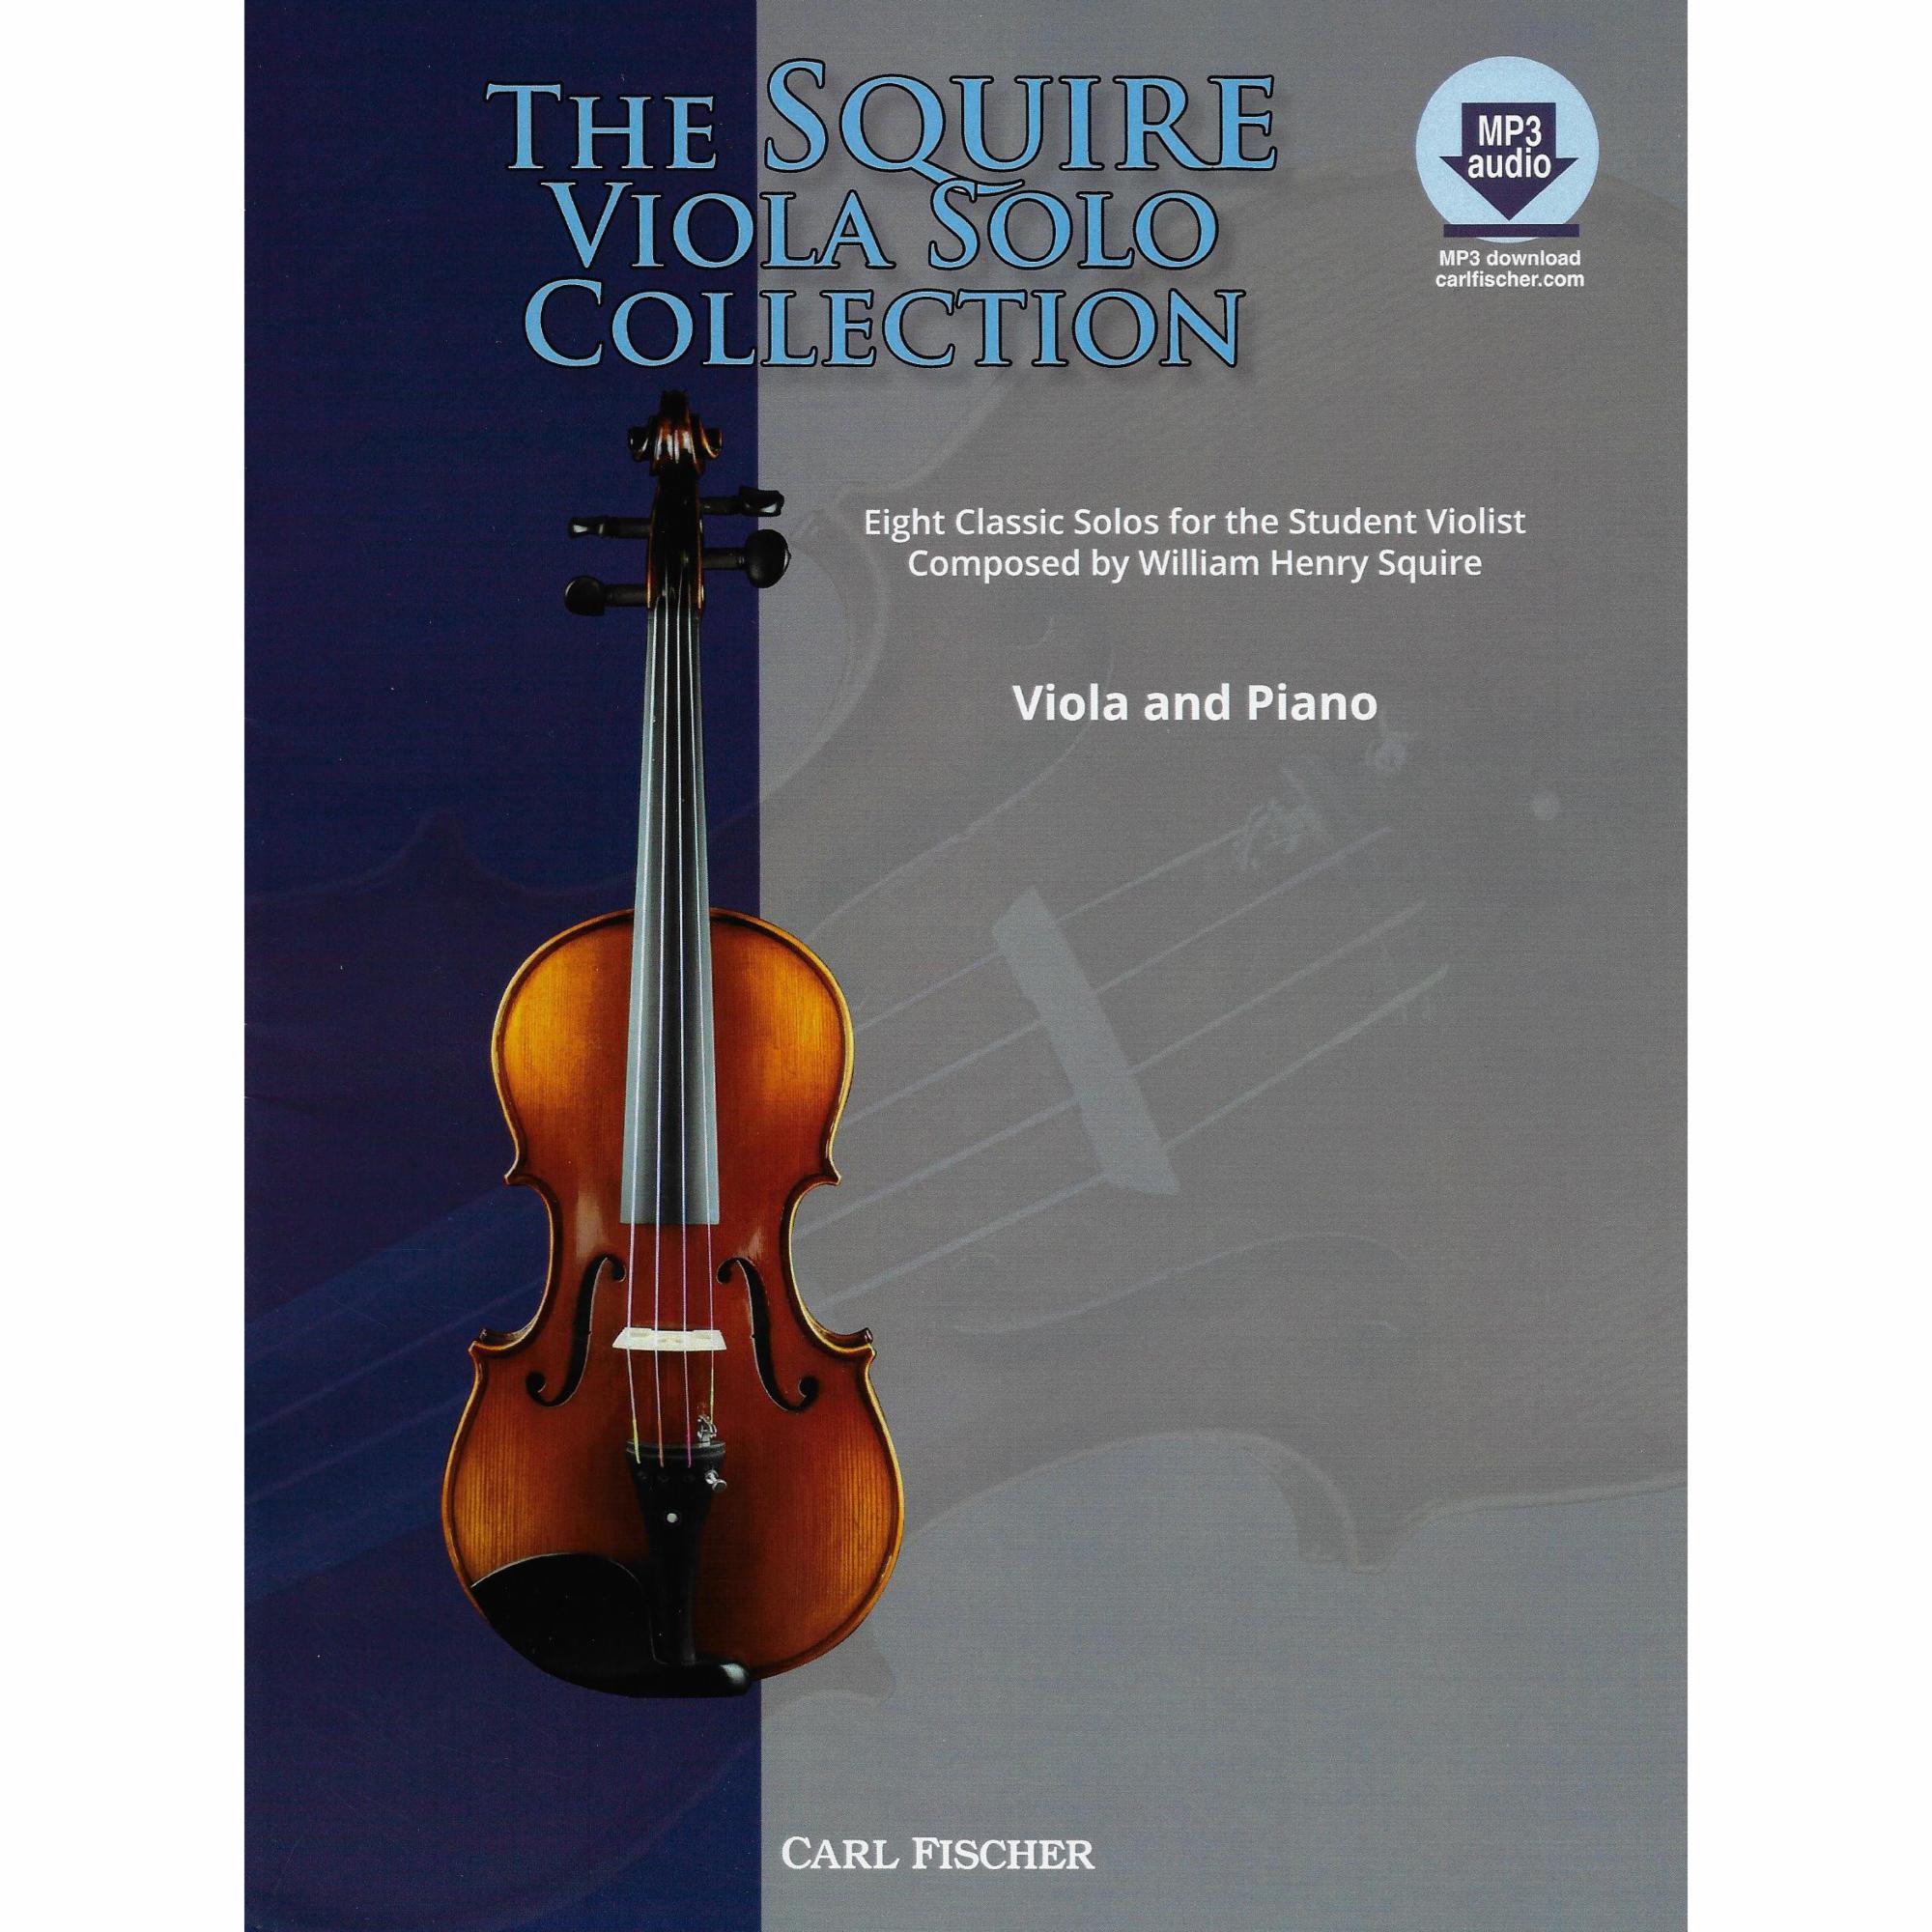 The Squire Viola Collection